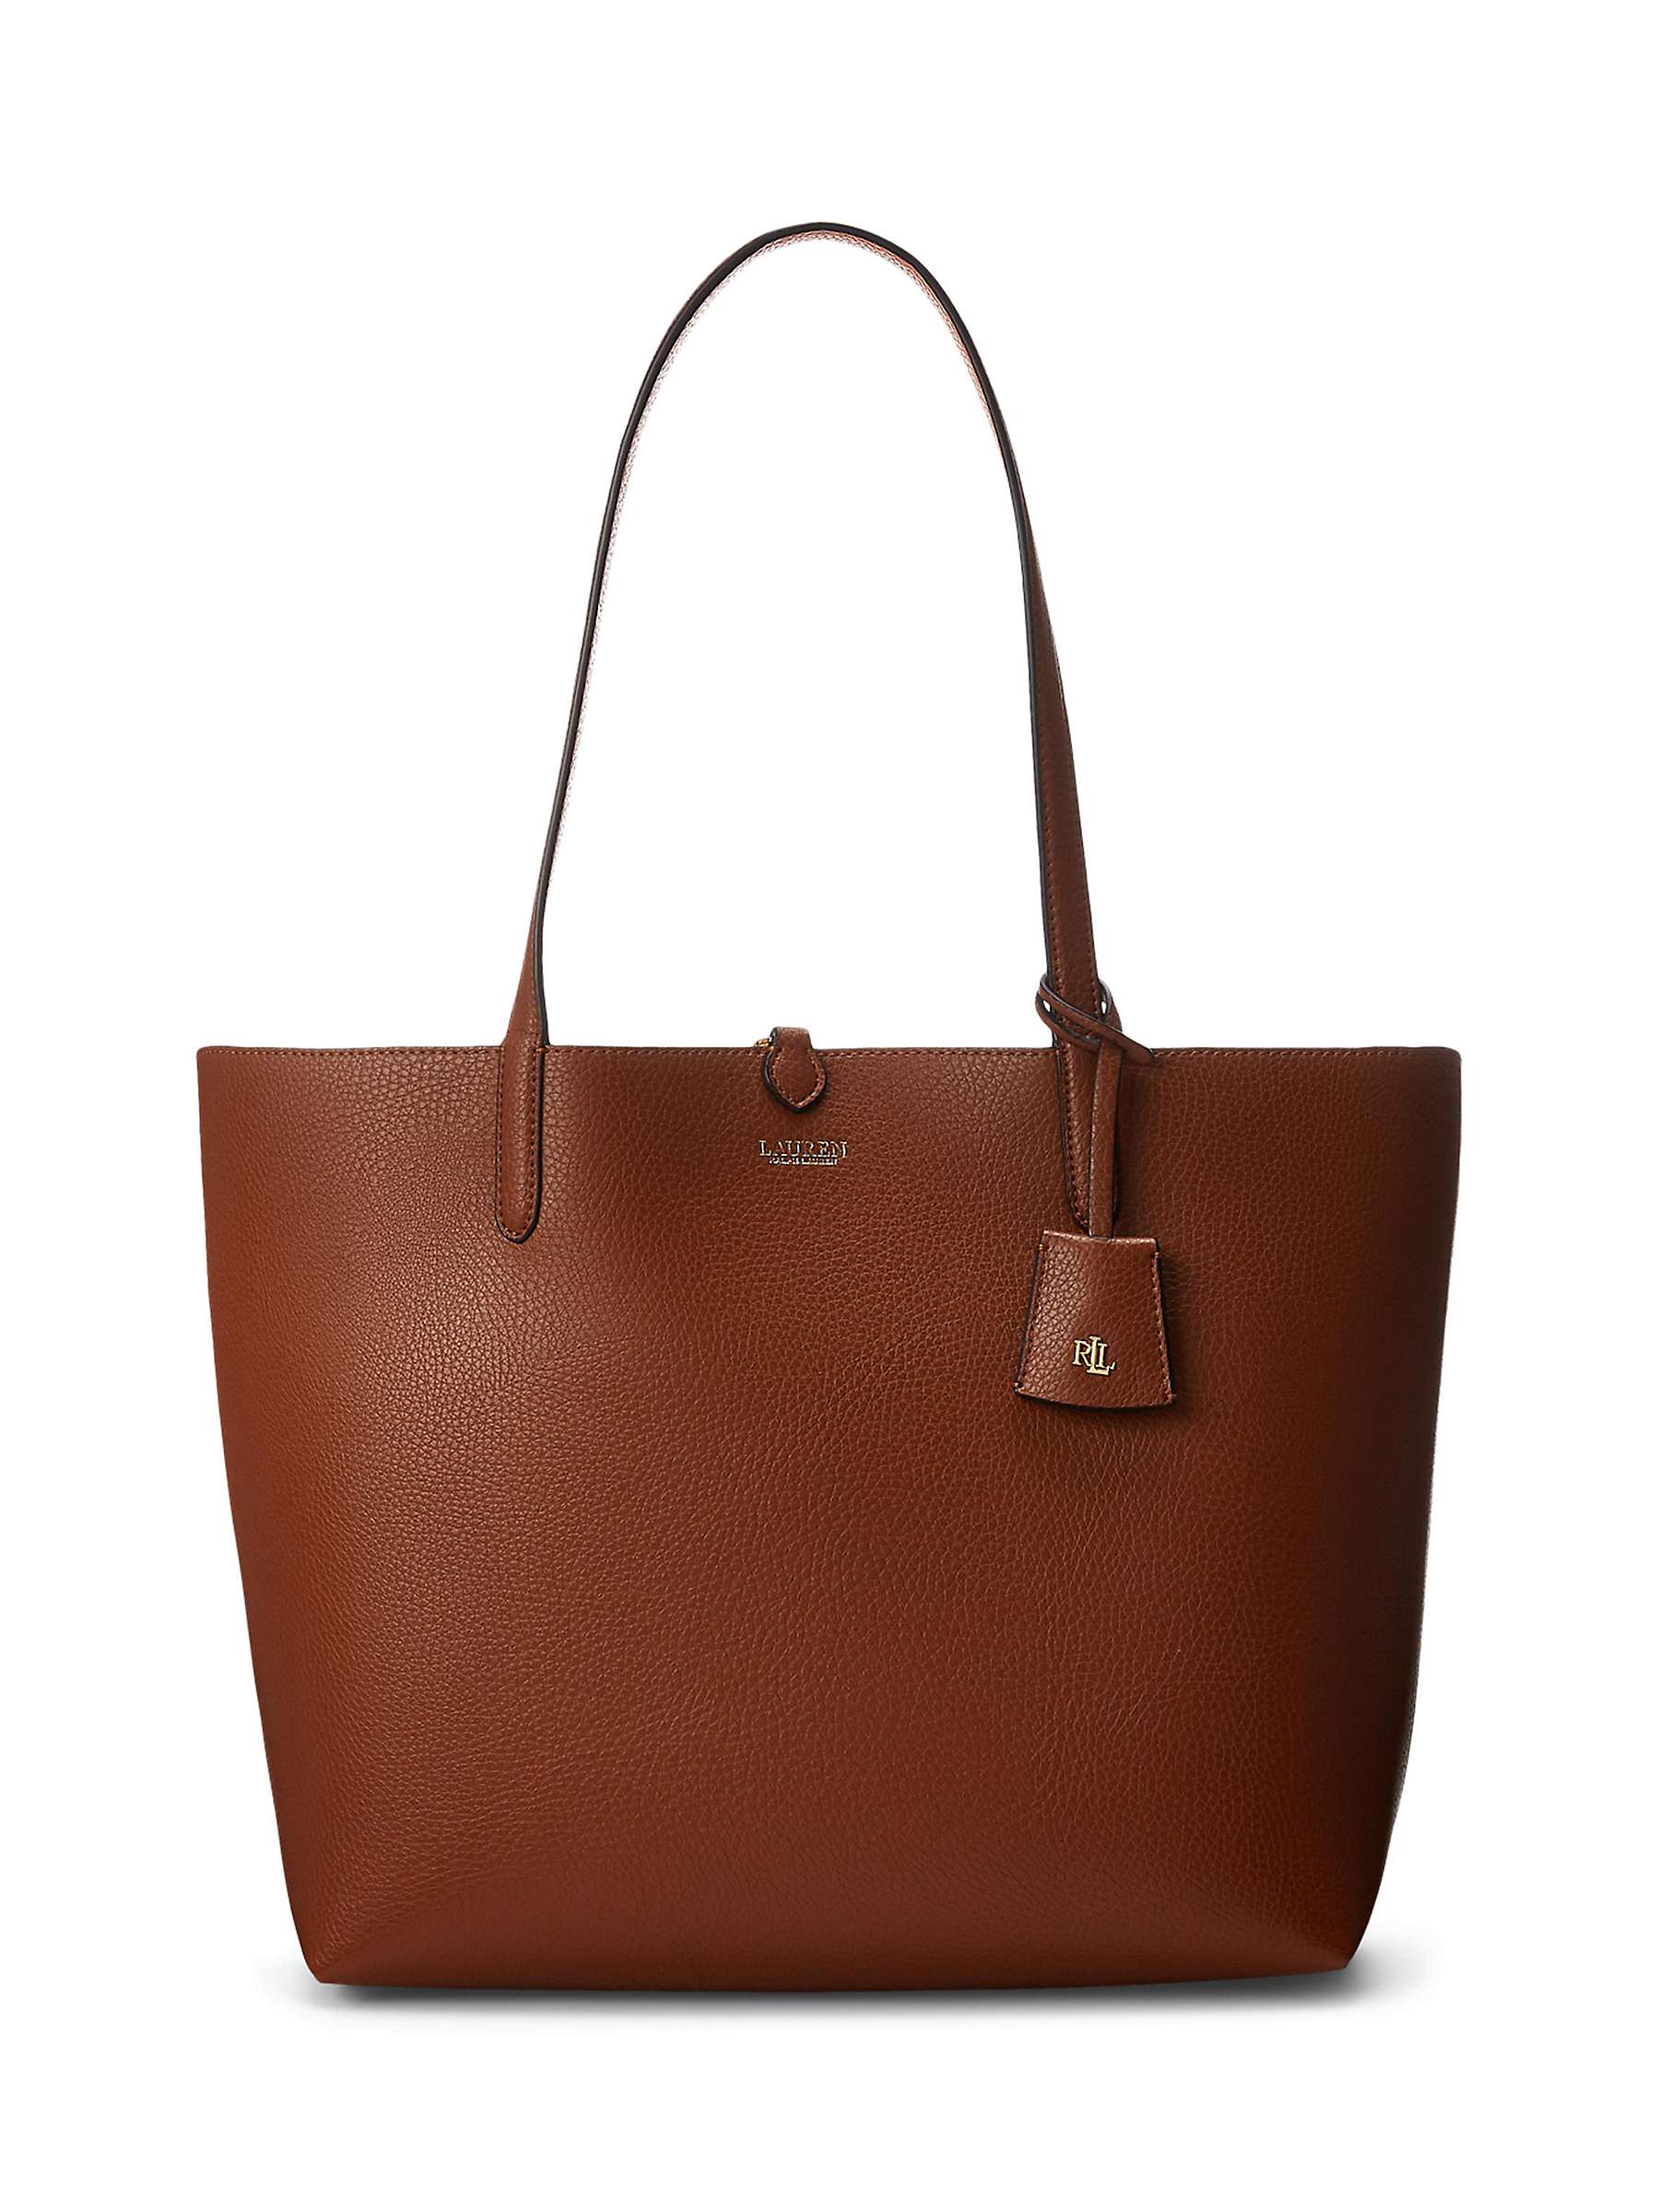 Tods Leather Tote Bag Bags in Brown Womens Bags Tote bags Save 25% 